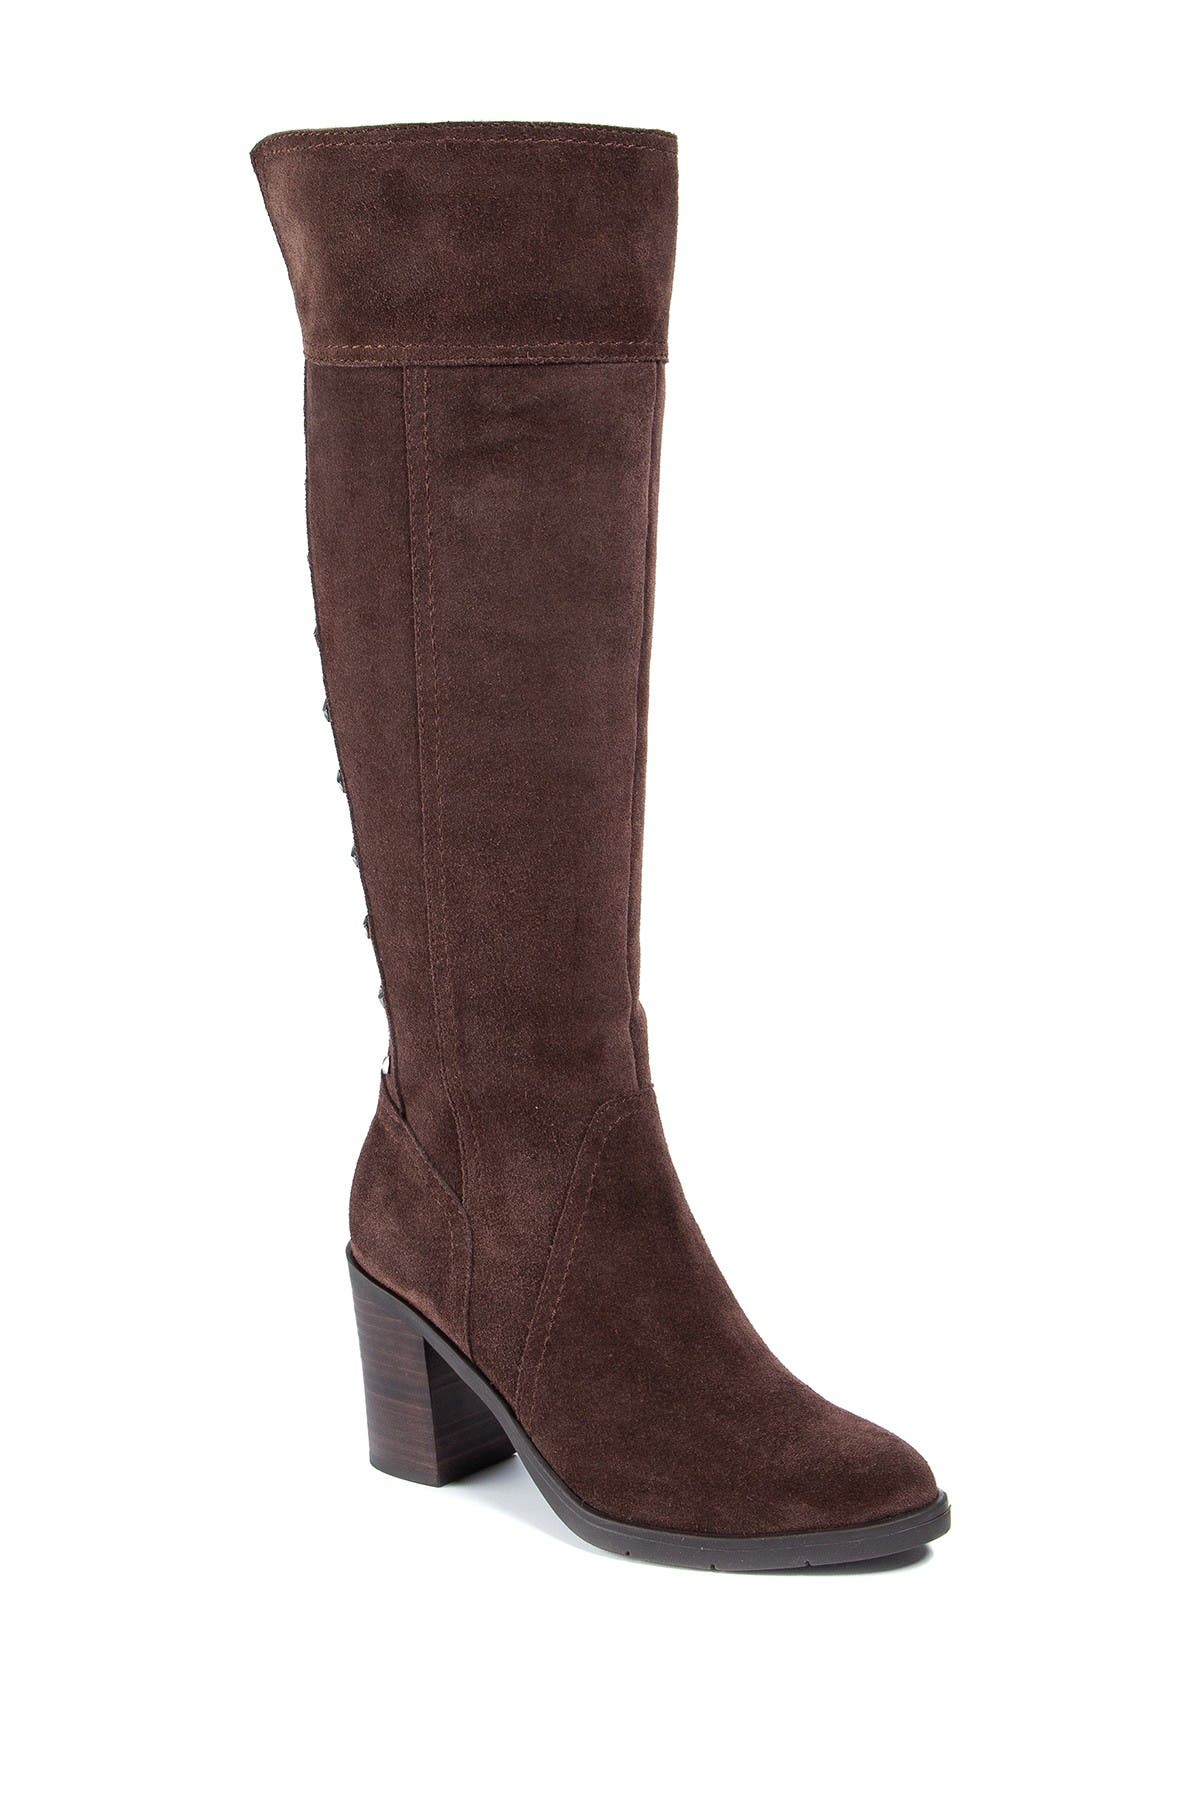 lucca lane boots